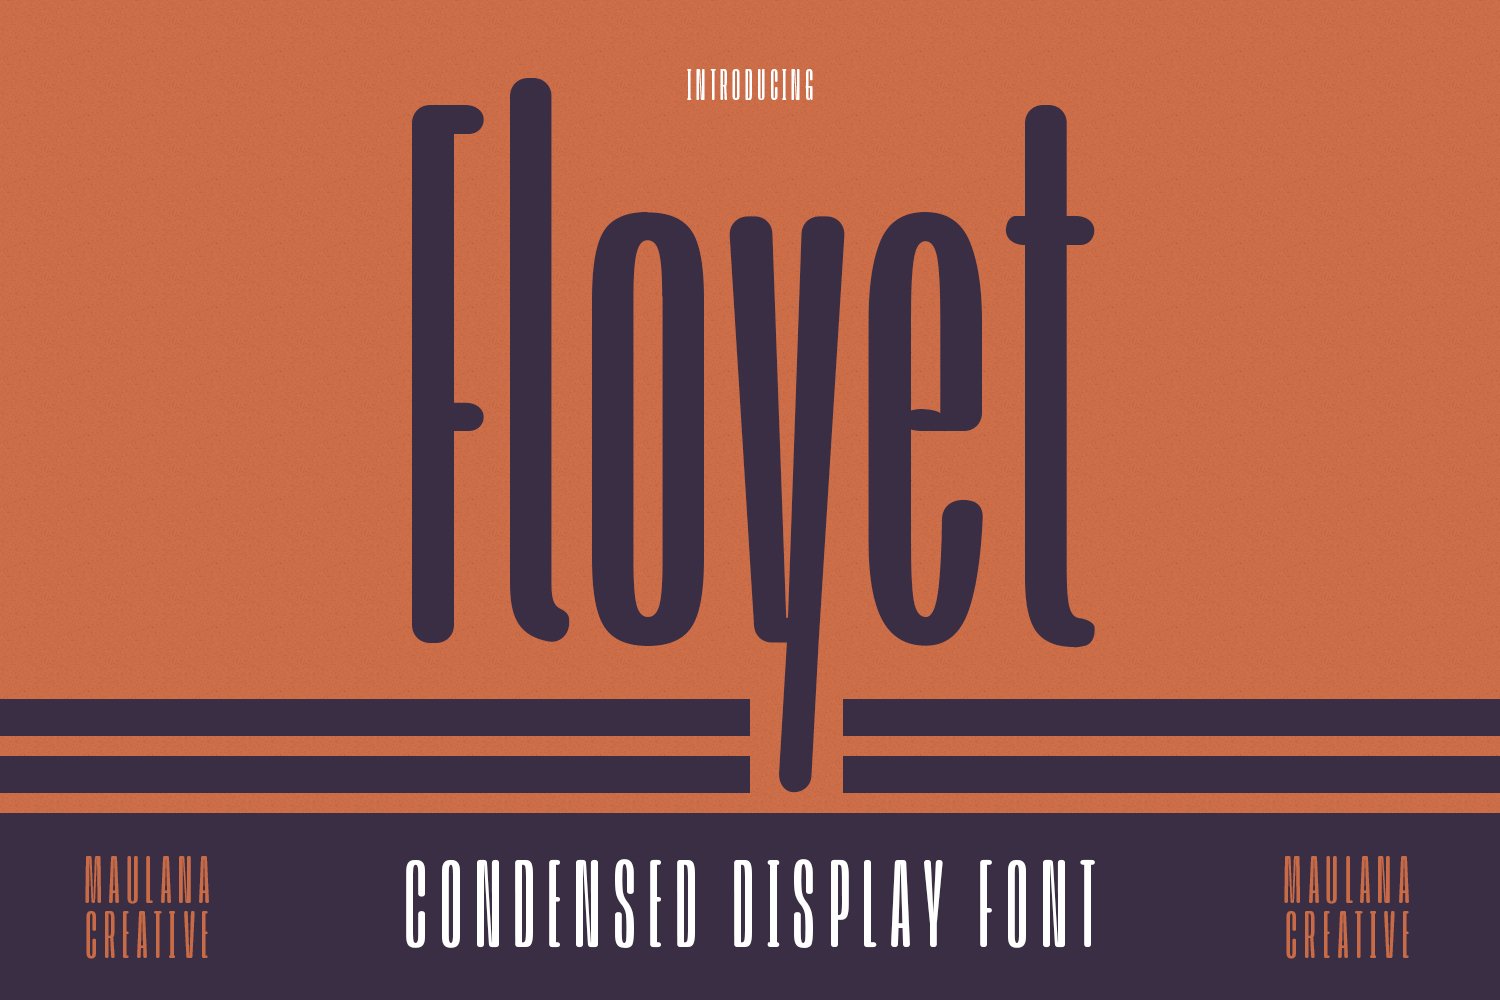 Floyet Condensed Display Font cover image.